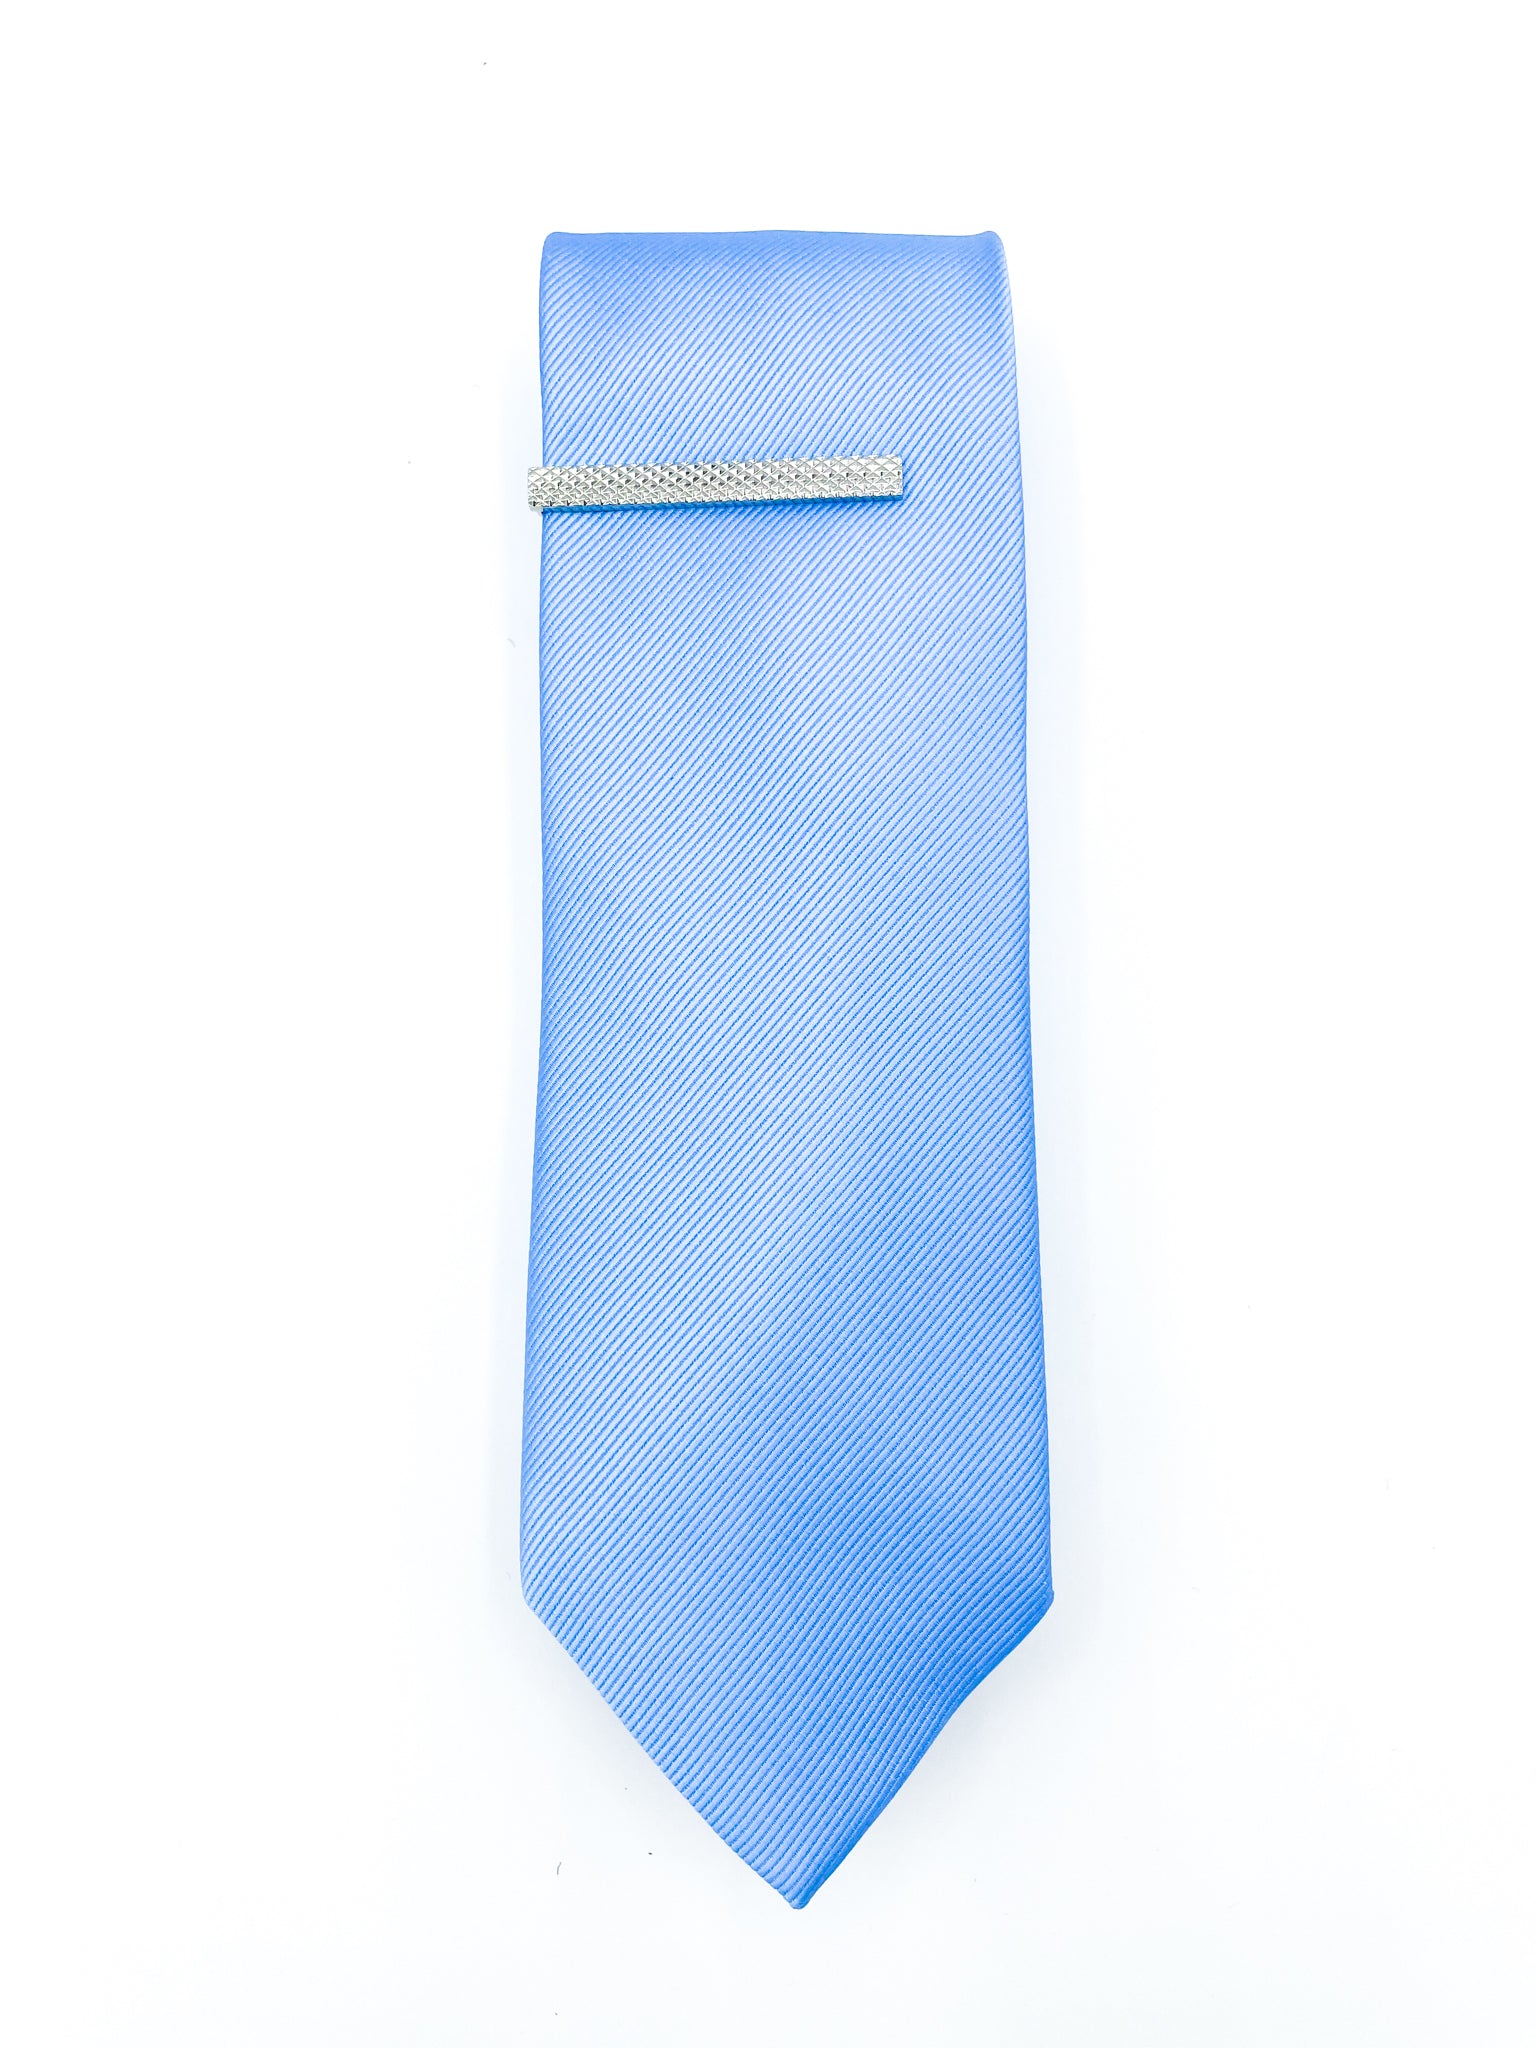 Blue Tie with Floral Pocket Square, Lapel Pin, Tie Bar and Fabric Bag